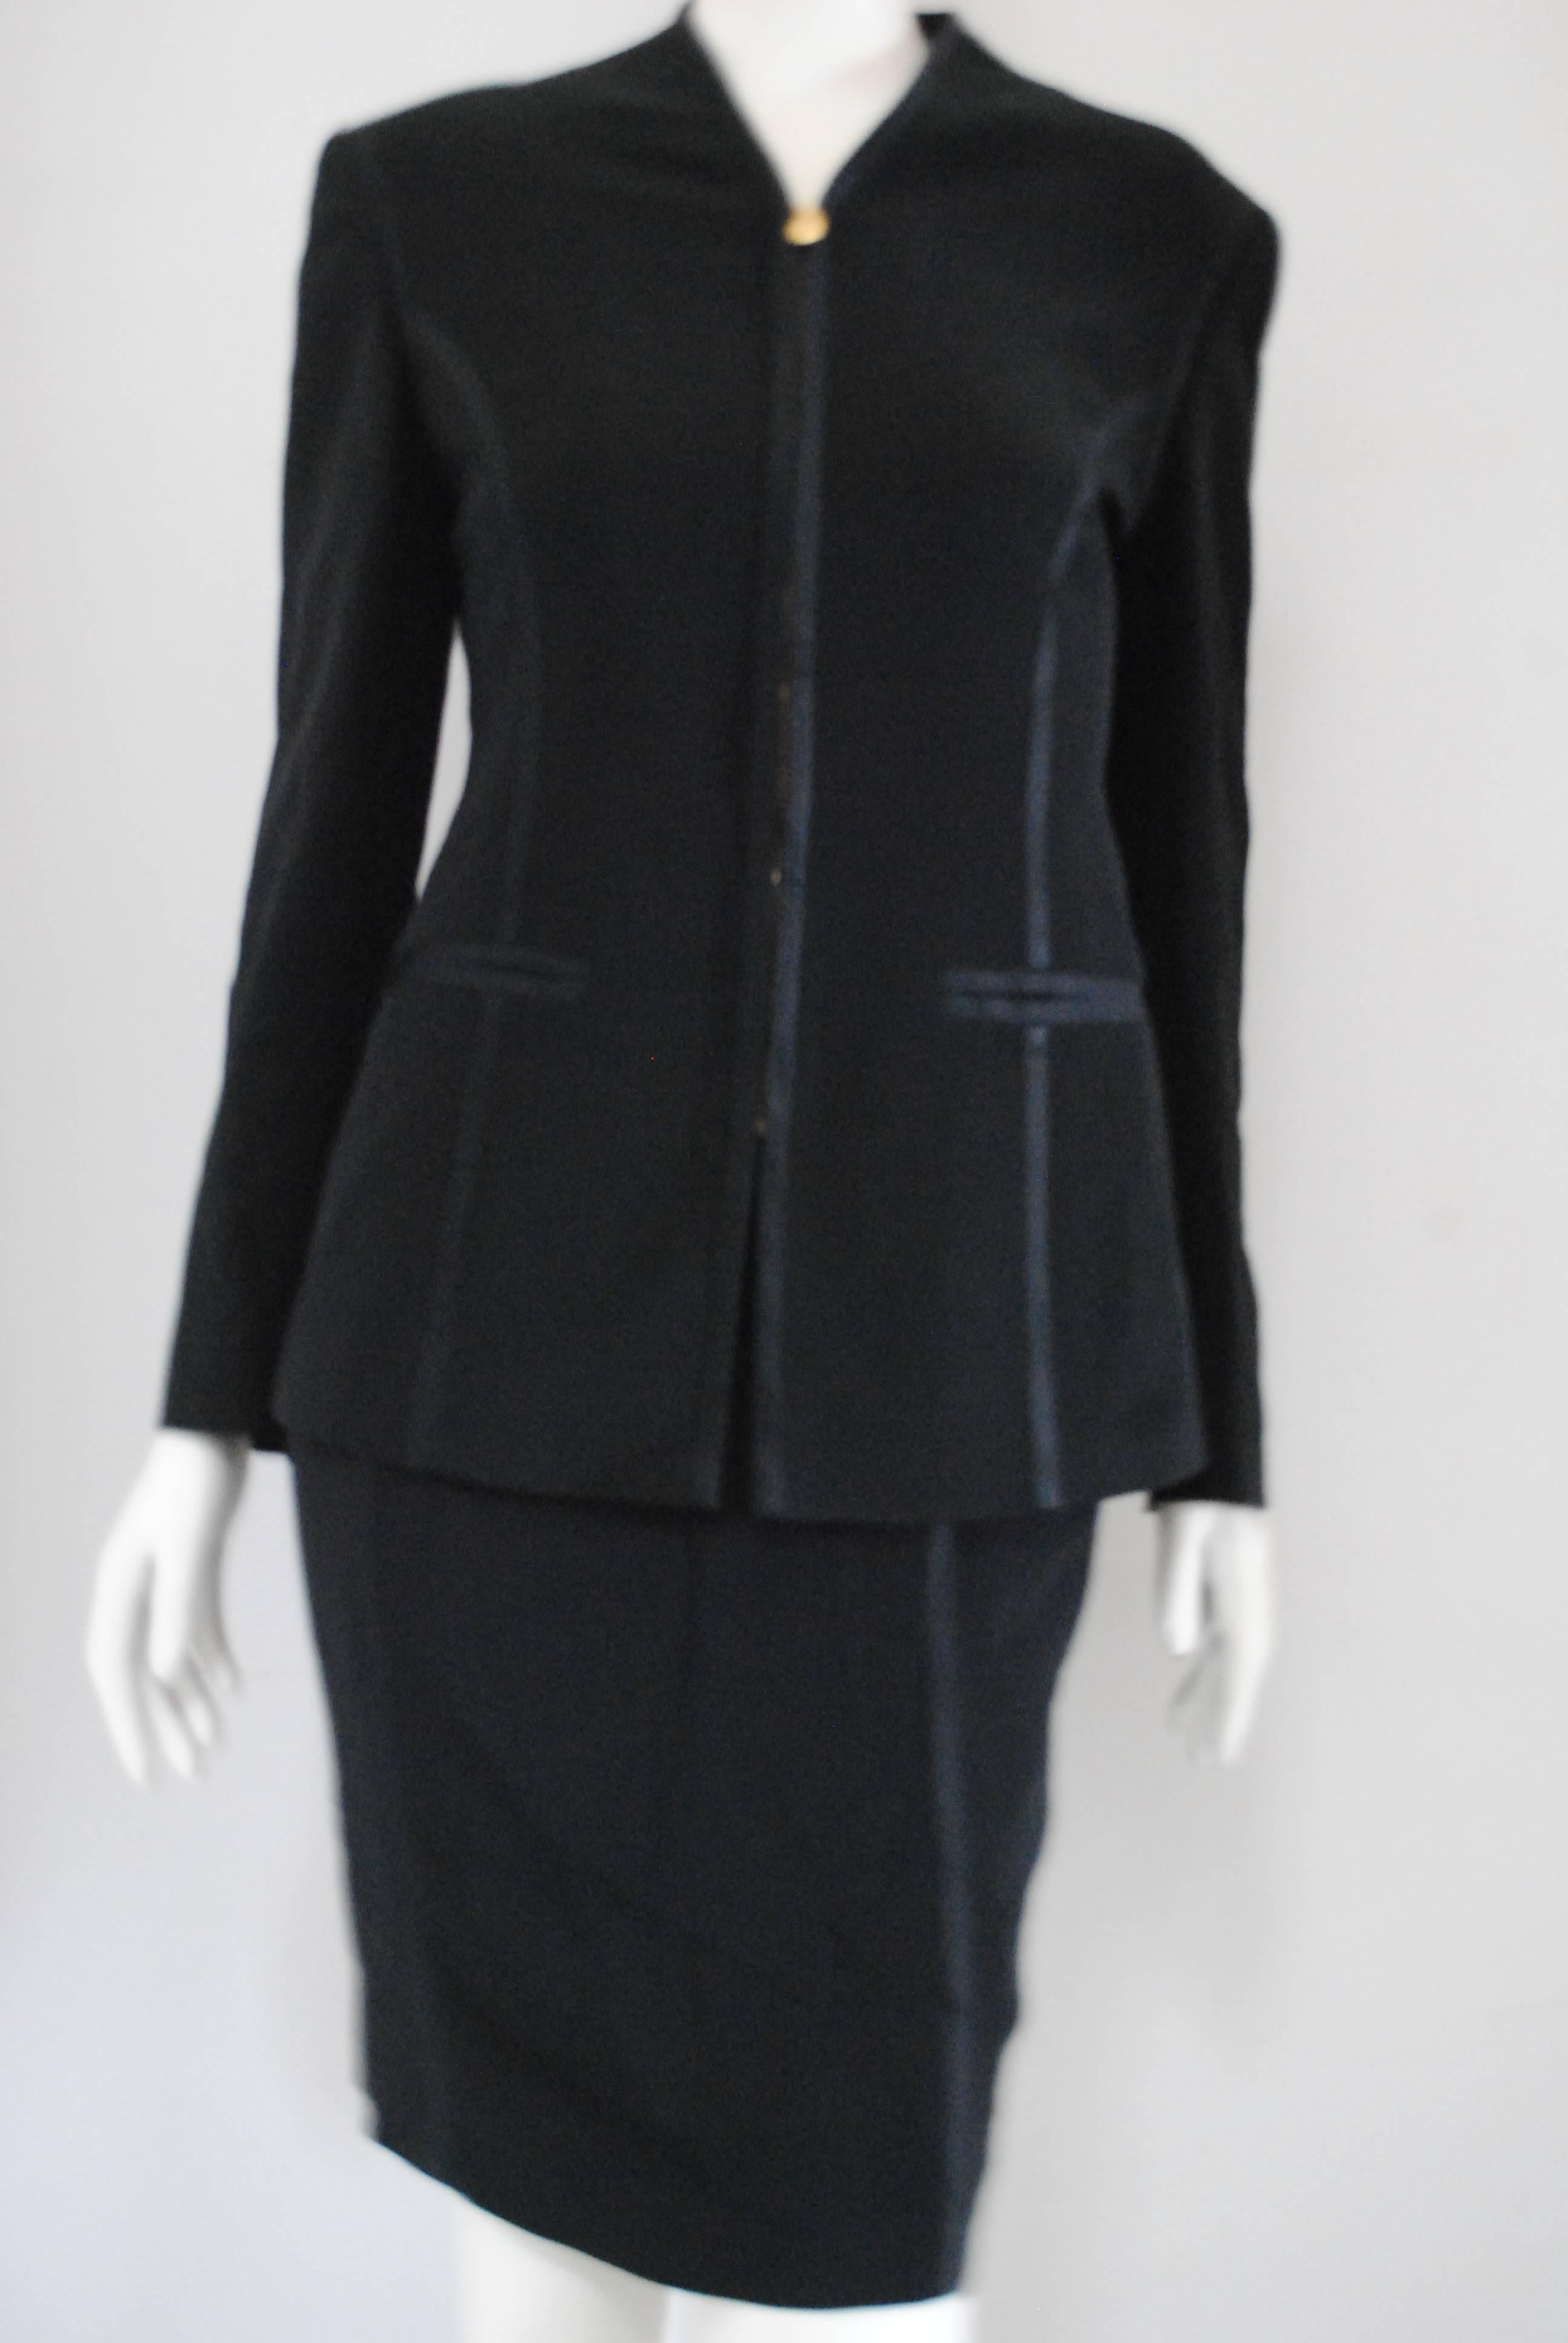 1990s Gucci Black Silk and acetate skirt suits with gold tone bottons and hardware

Totally made in italy in italian size range 42

Composition Silk and acetate

Jacket Measurements:
- lenght 70 cm 
- shoulder to hem 58 cm
- bust 88 cm
- shoulder to